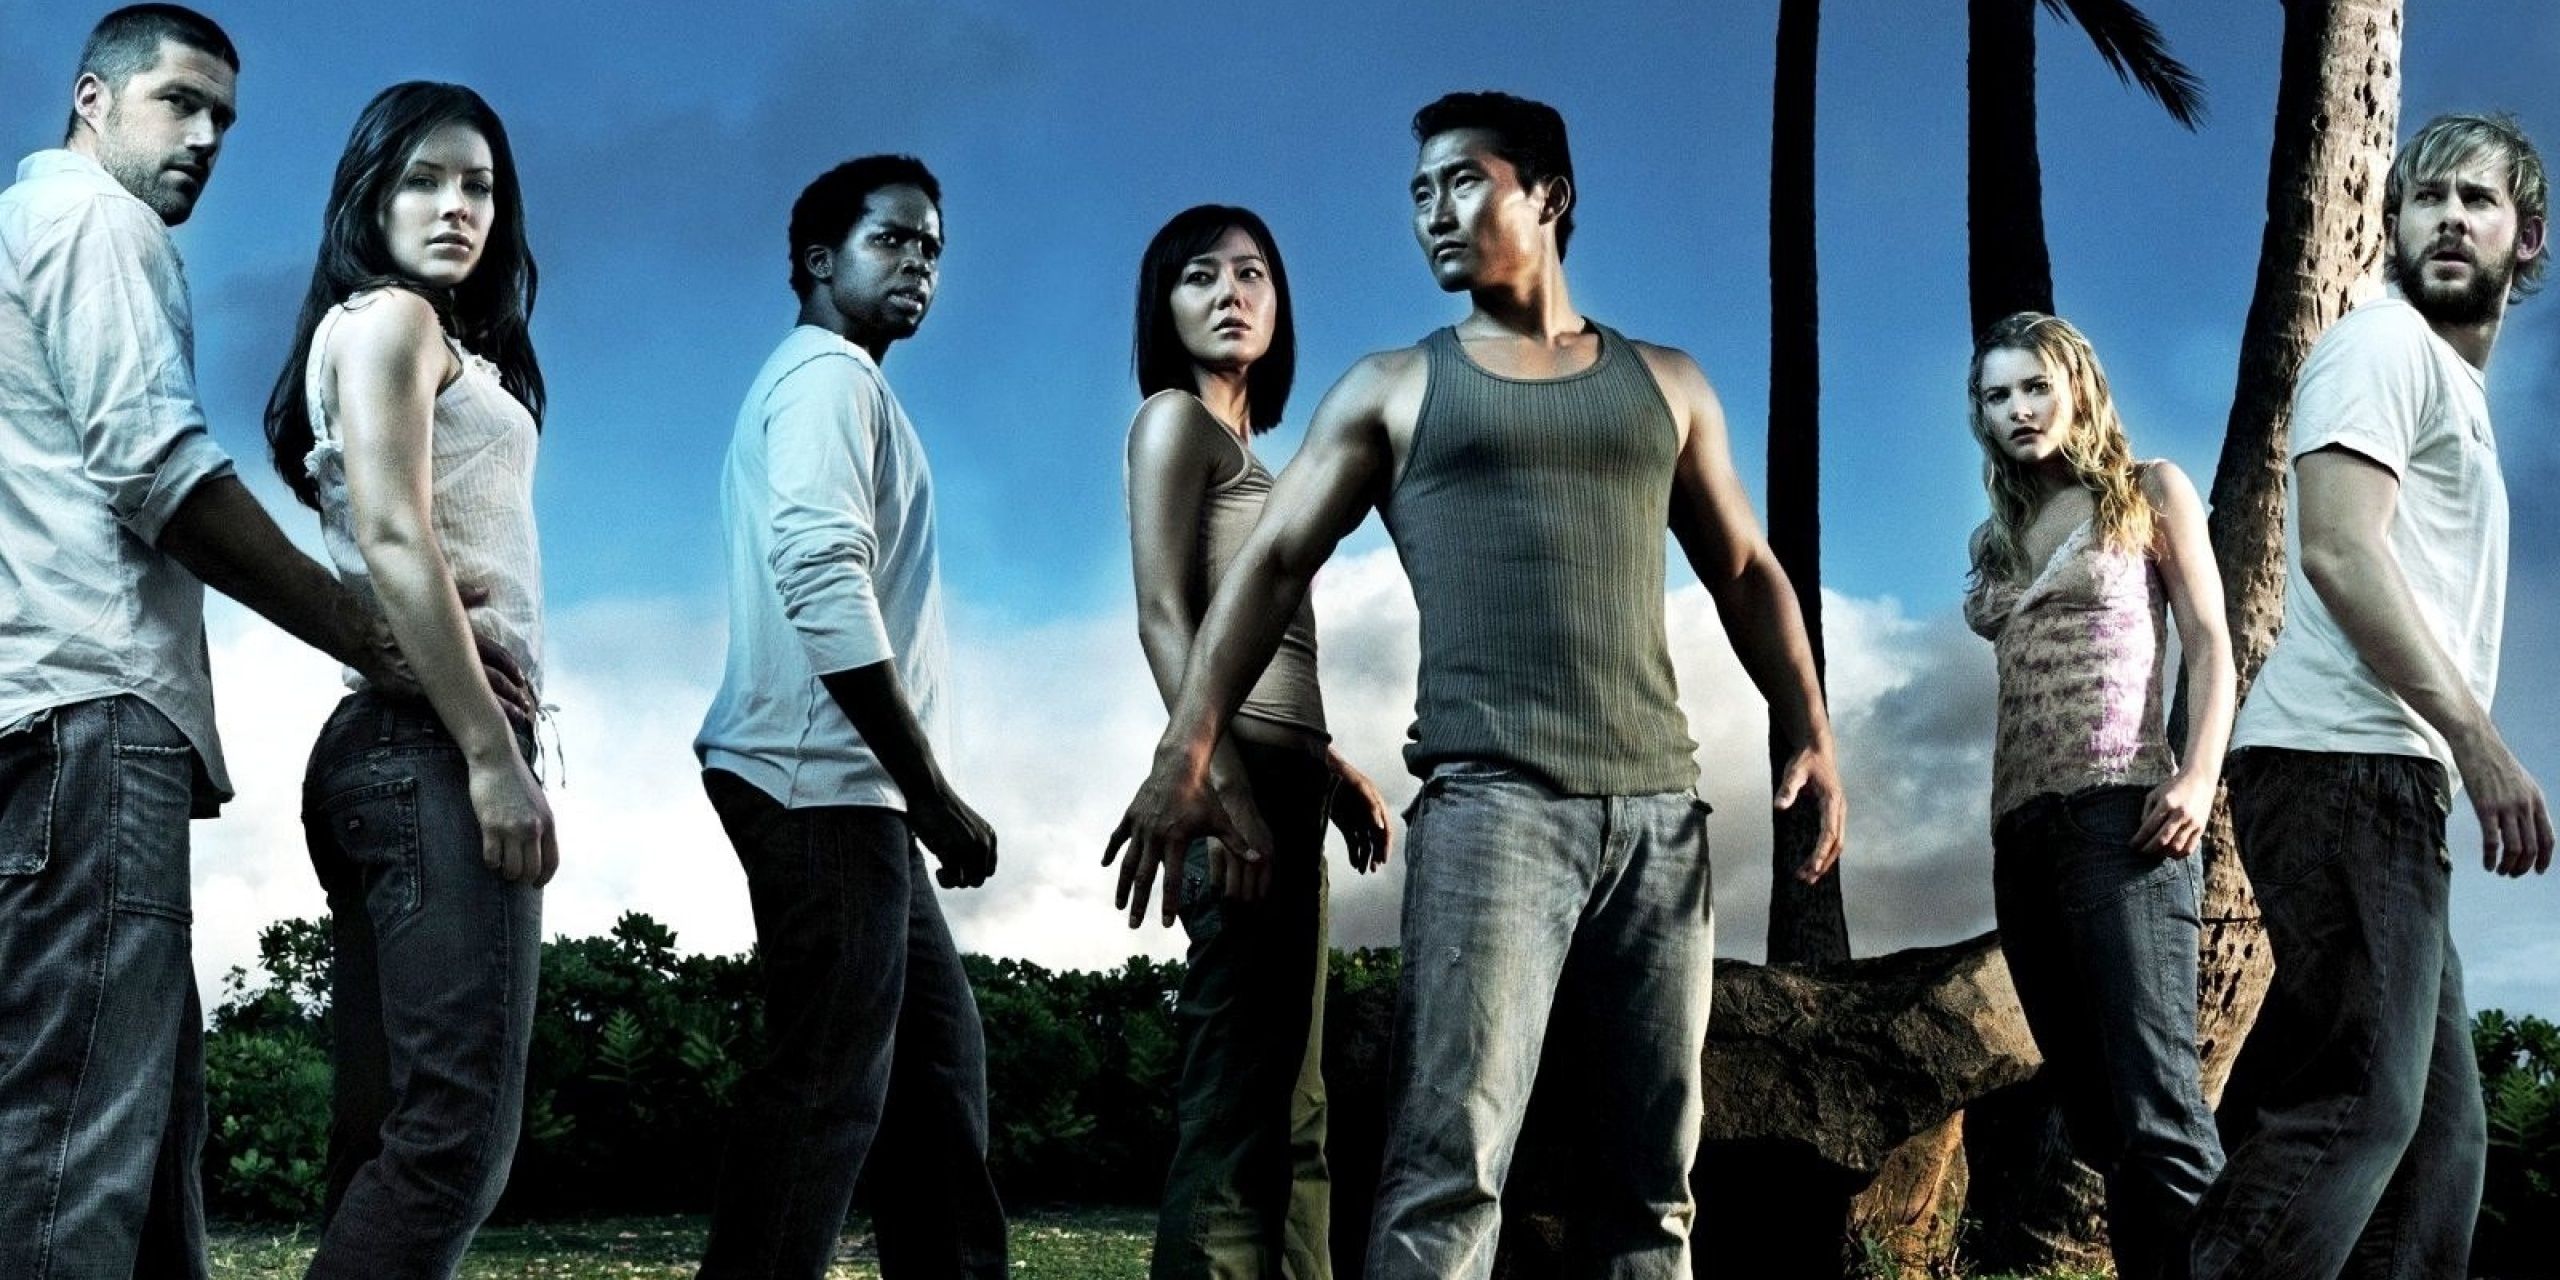 Cast of Lost standing on the island in a promotional photo